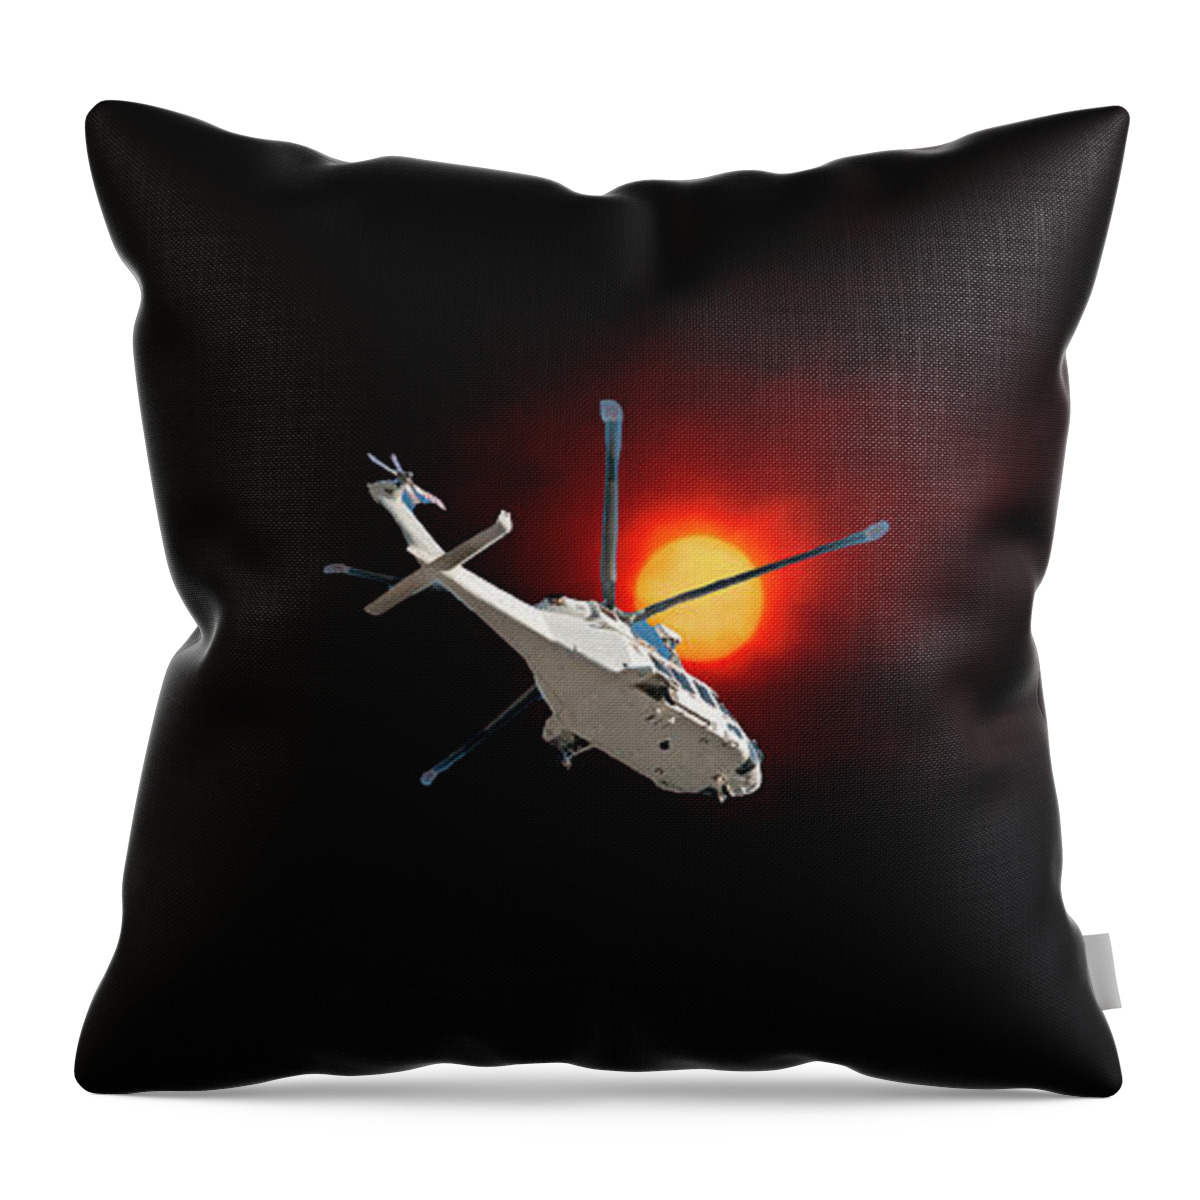 Bushfire Sunset Throw Pillow featuring the photograph Dramatic Bushfire Sunset Sky. by Geoff Childs